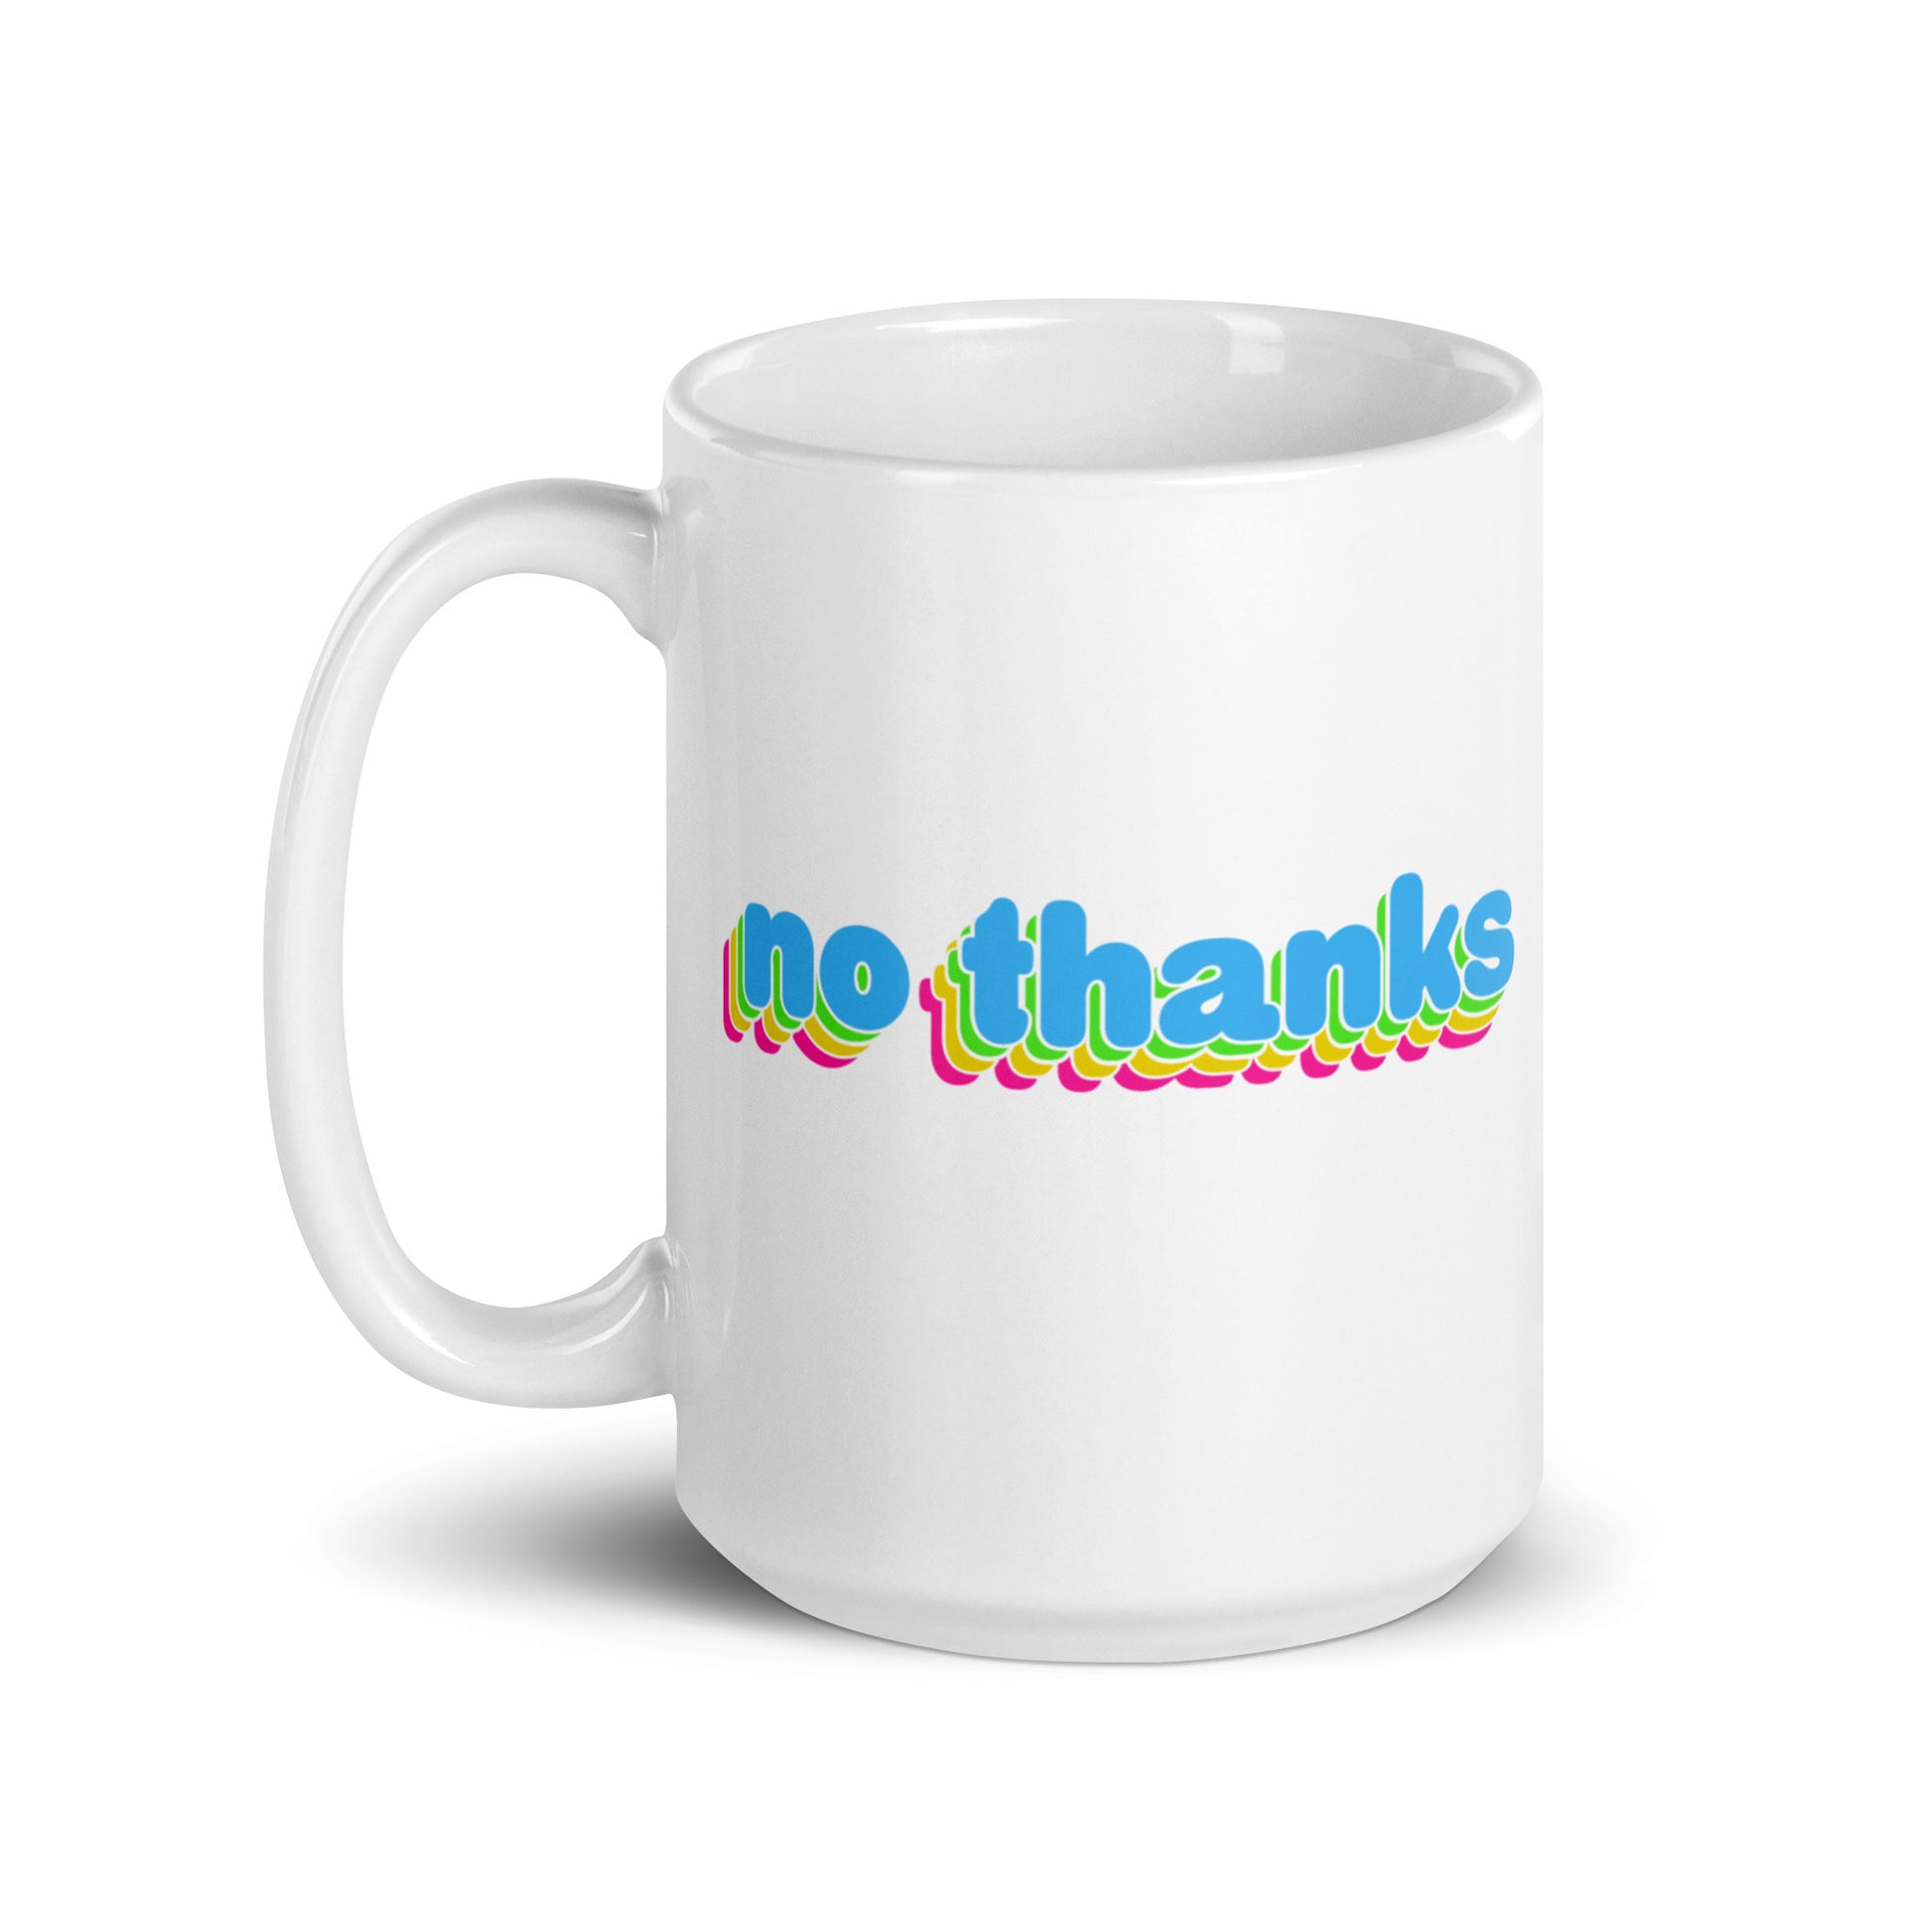 A white 15 oz ceramic mug with the handle to the left featuring colorful bubble text reading "no thanks"